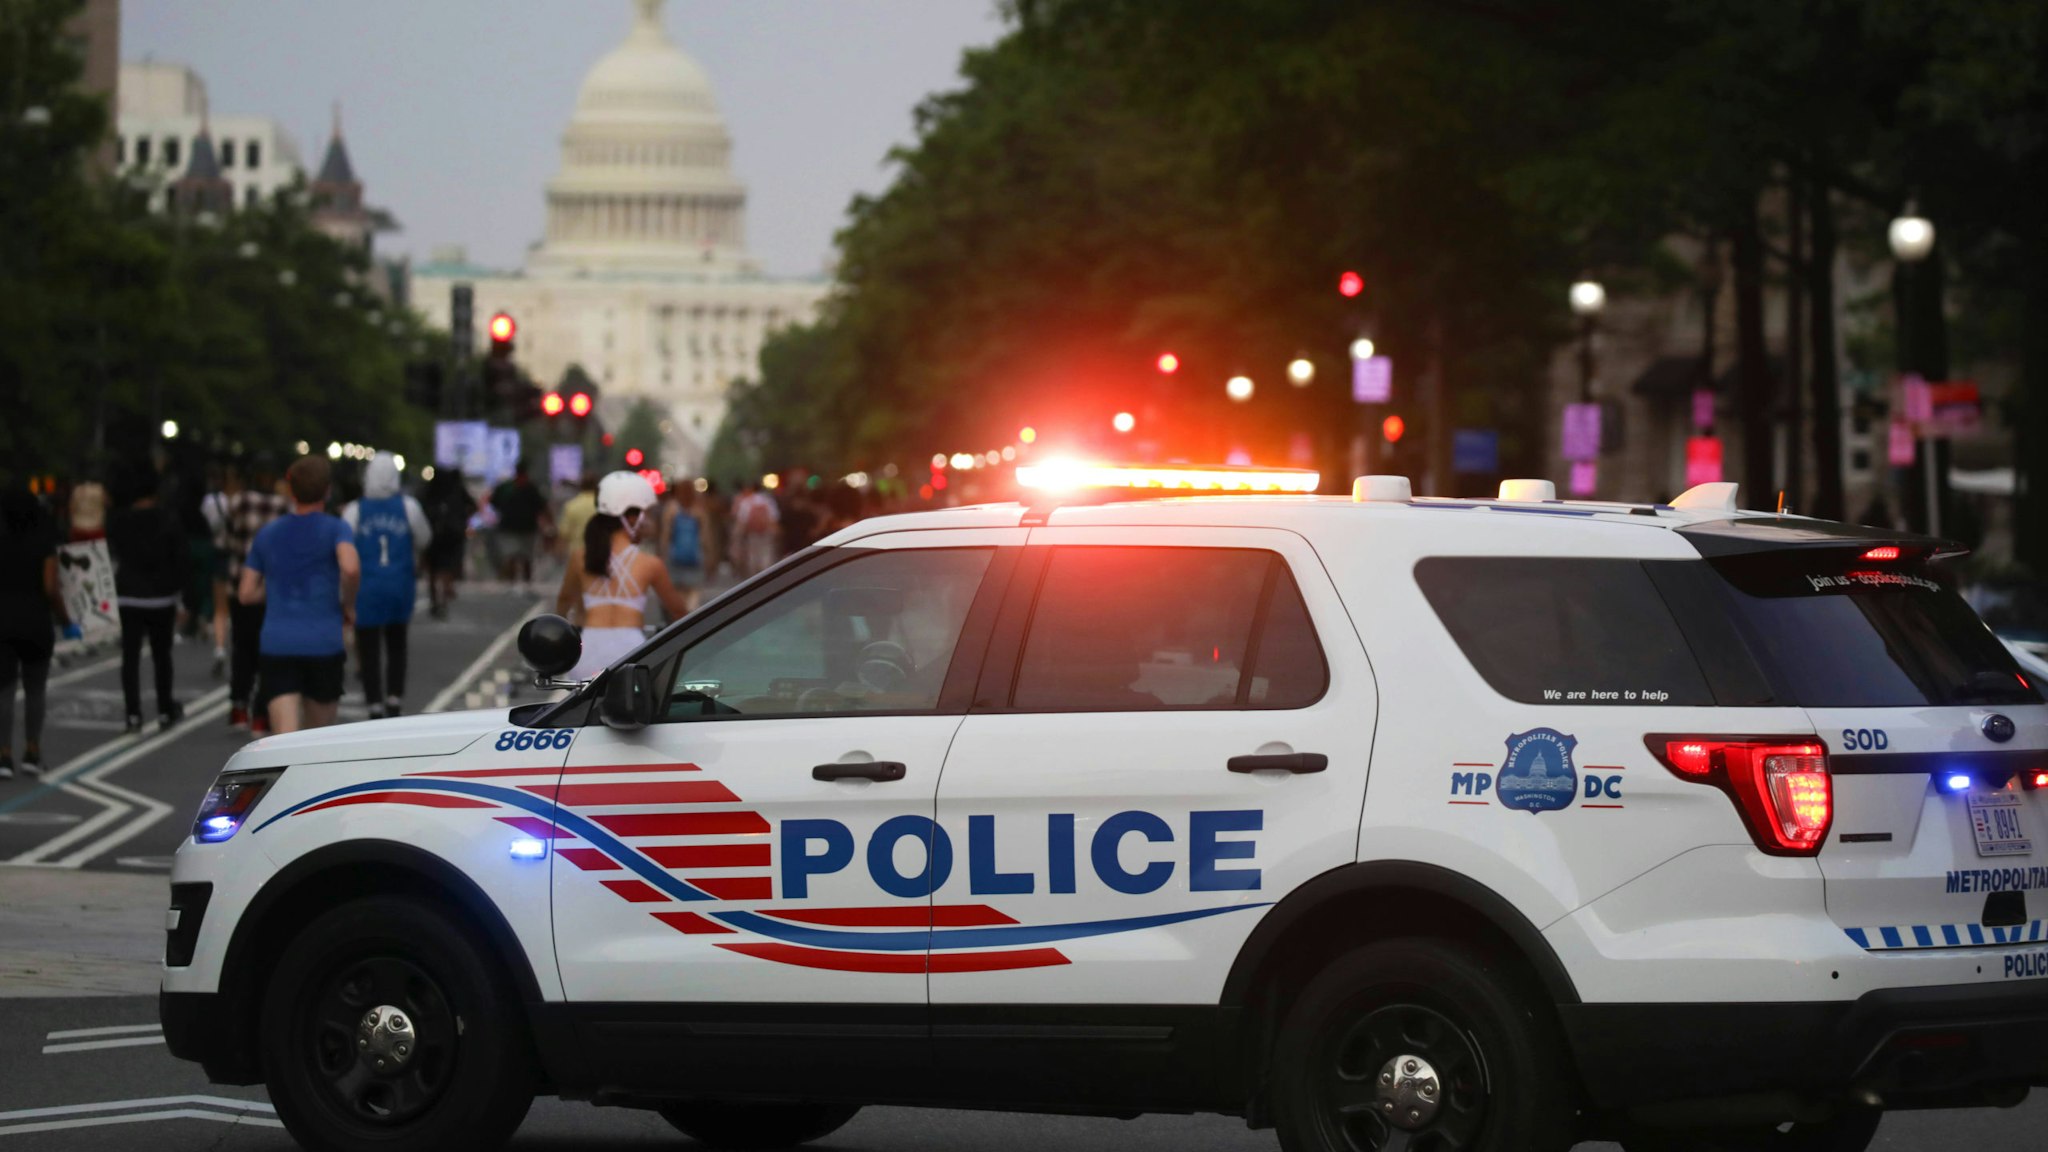 WASHINGTON, USA - MAY 29: A police car is seen as hundreds of demonstrators rally hours after the arrest of a white police officer involved in the death of a black man George Floyd in the state of Minnesota on May 29, 2020 in Washington D.C. United States. Floyd, 46, a black man, was arrested Monday after reportedly attempting to use a counterfeit $20 bill at a local store. Video footage on Facebook showed him handcuffed and cooperating. But police claimed he resisted arrest. A white officer kneeled on his neck, despite Floydâs repeated pleas of "I can't breathe." Former police officer Derek Chauvin was charged with third-degree murder and manslaughter, according to Hennepin County Prosecutor Michael Freeman. Minneapolis, Minnesota Mayor Jacob Frey said Friday he imposed a mandatory curfew because of ongoing protests regarding the death of George Floyd. Protestors made their way to the White House where they faced a police response with some clashing with the secret service members.